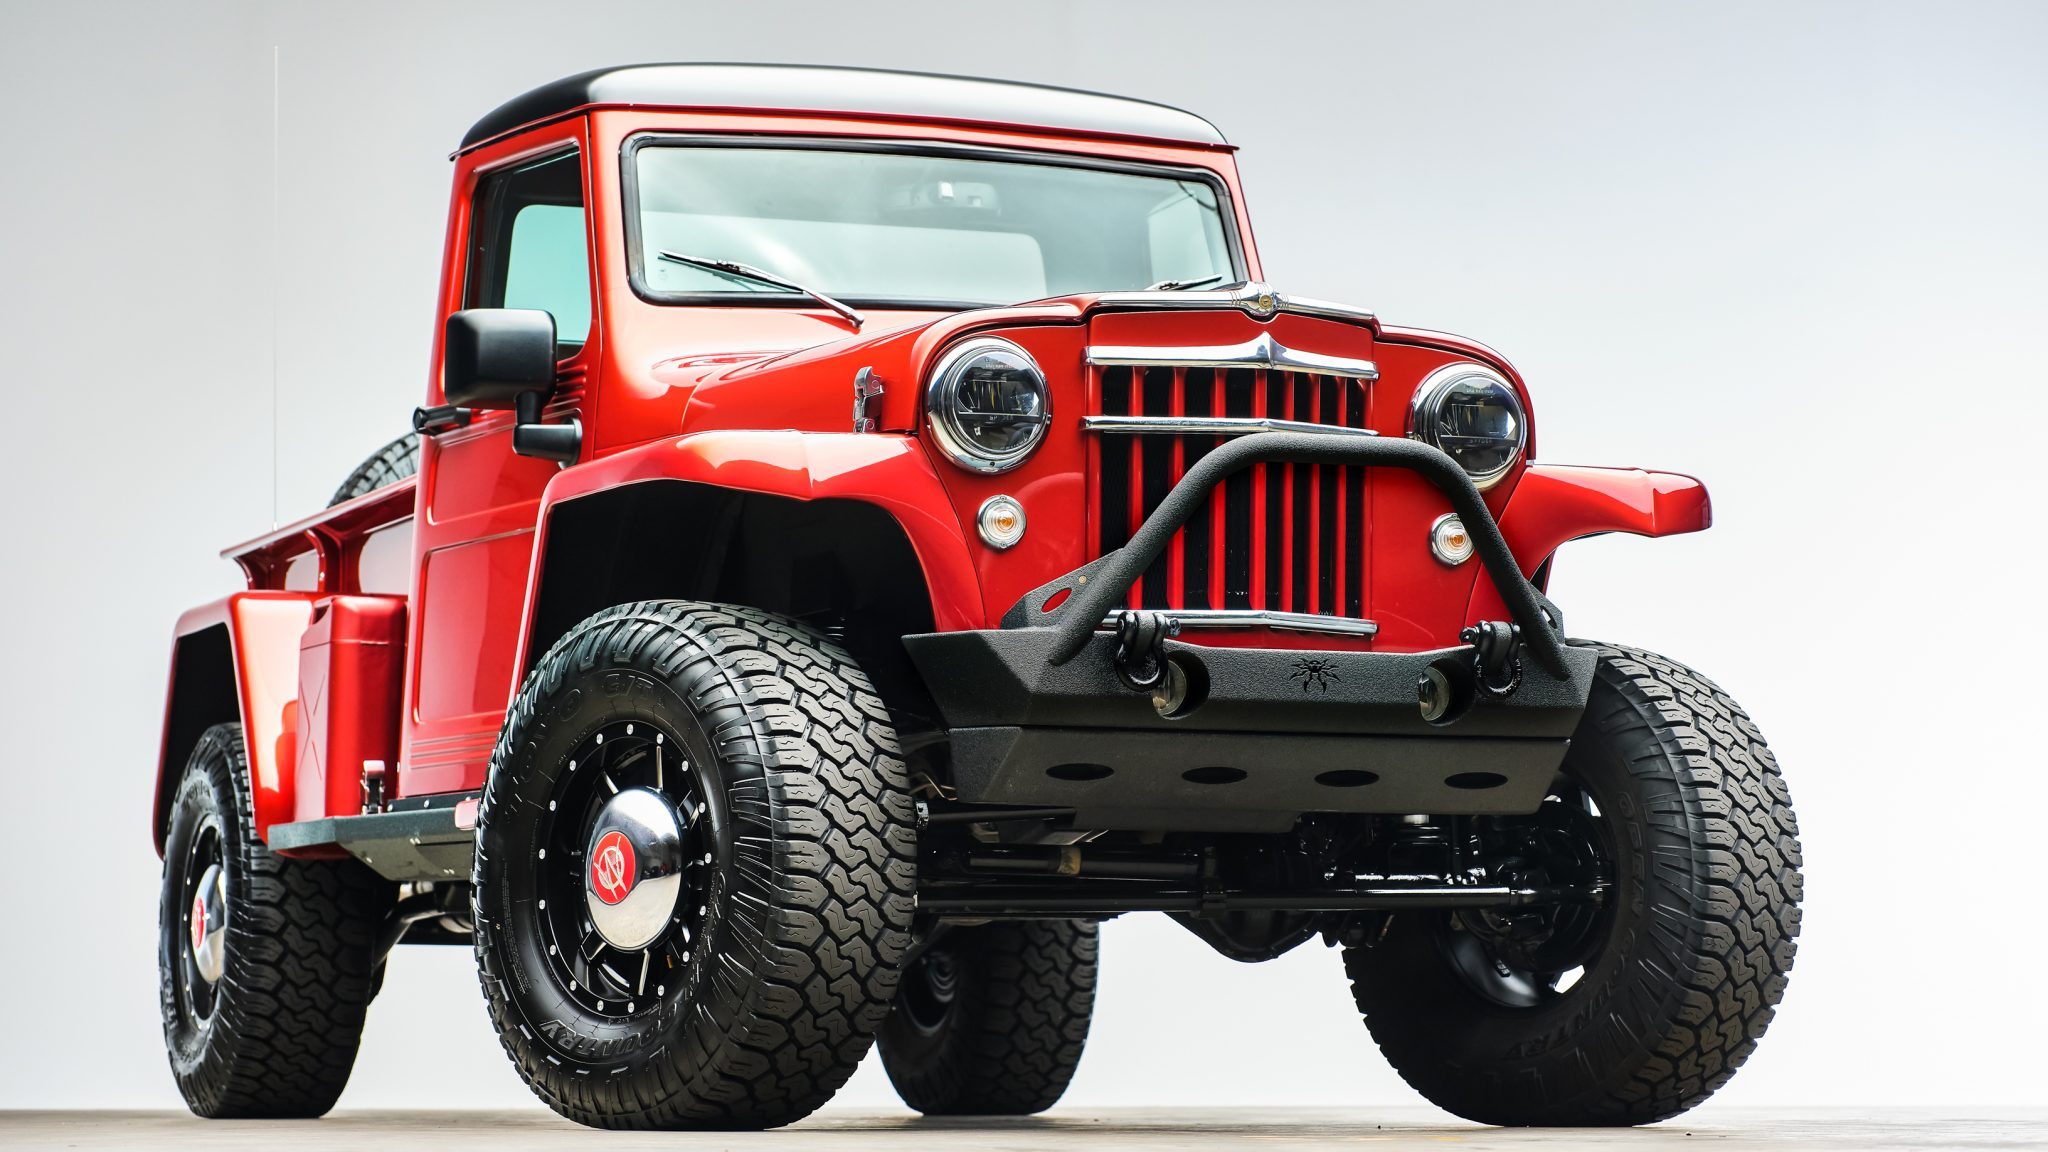 1955 Willys Jeep Pickup With JK Wrangler Chassis Rocks Supercharged V6  Engine - autoevolution